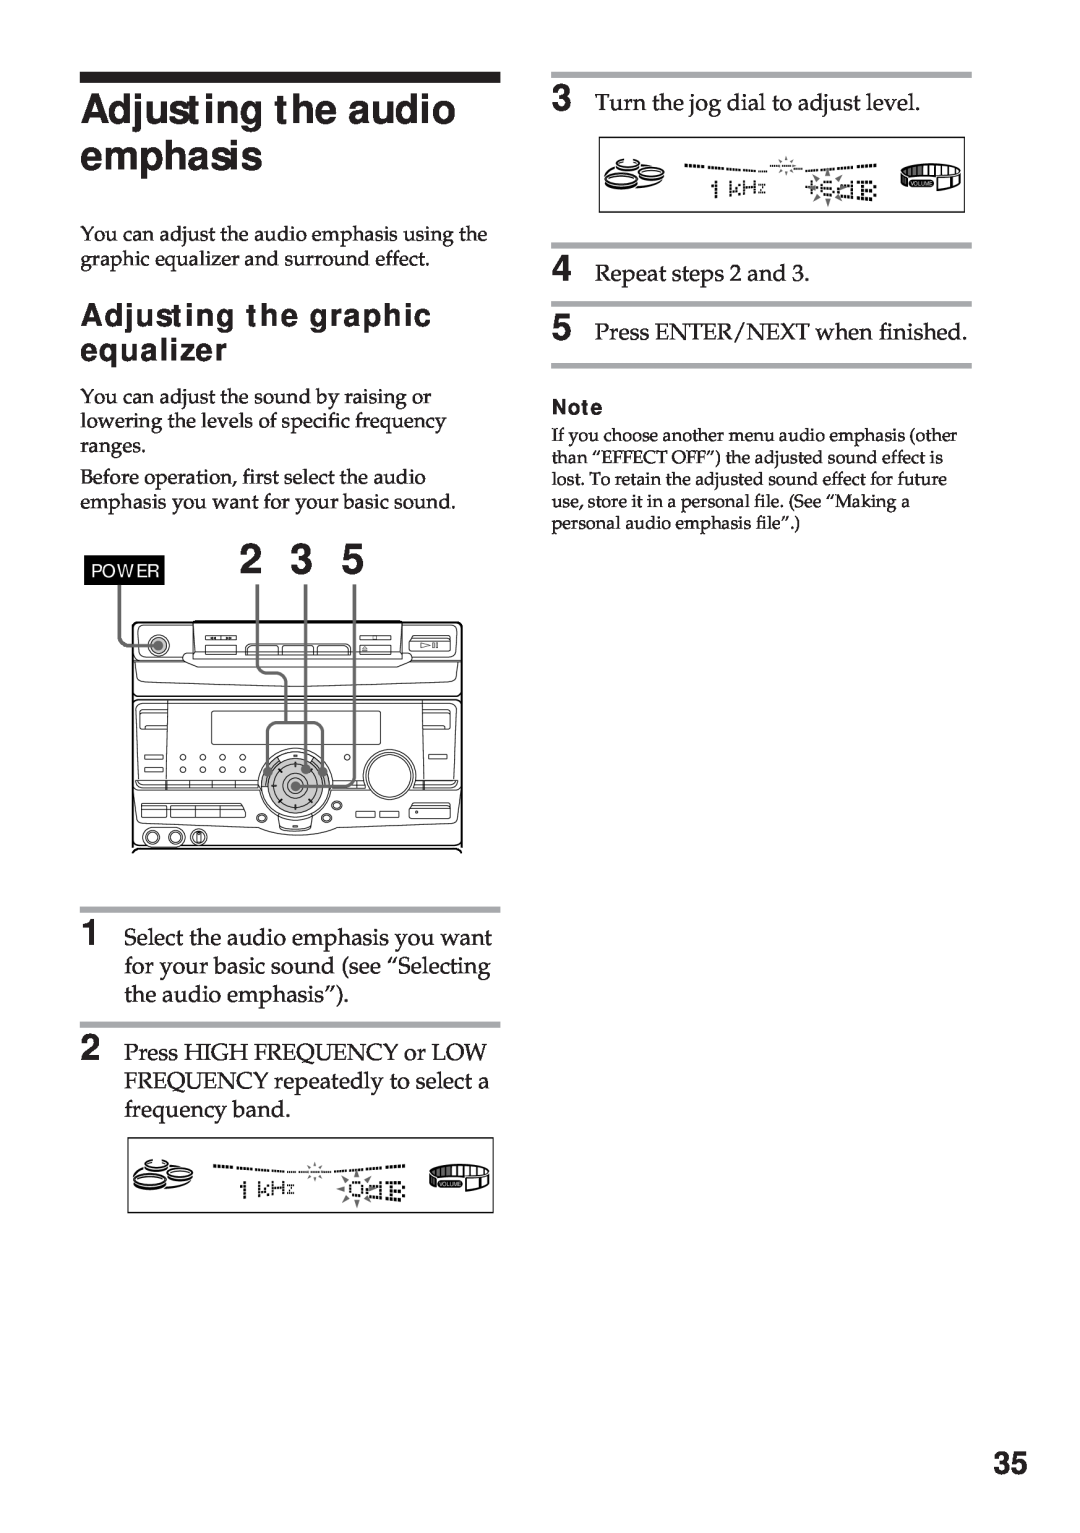 Sony MHC-RX100AV operating instructions Adjusting the audio emphasis, Adjusting the graphic equalizer 